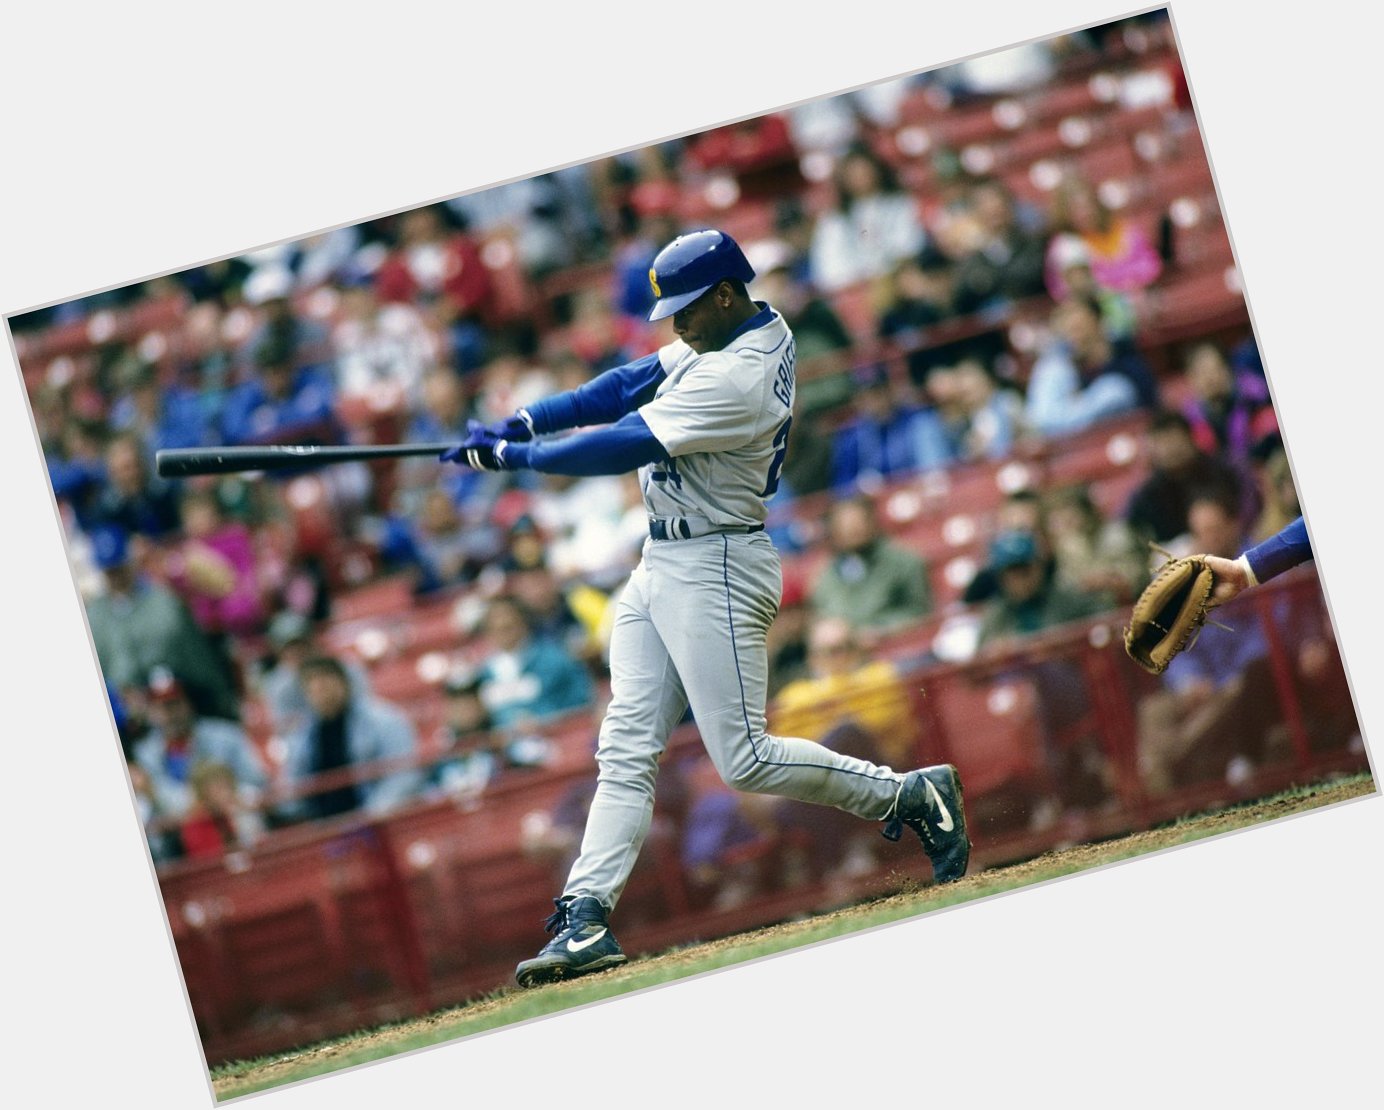 Happy Birthday to Ken Griffey Jr., who turns 48 today! 